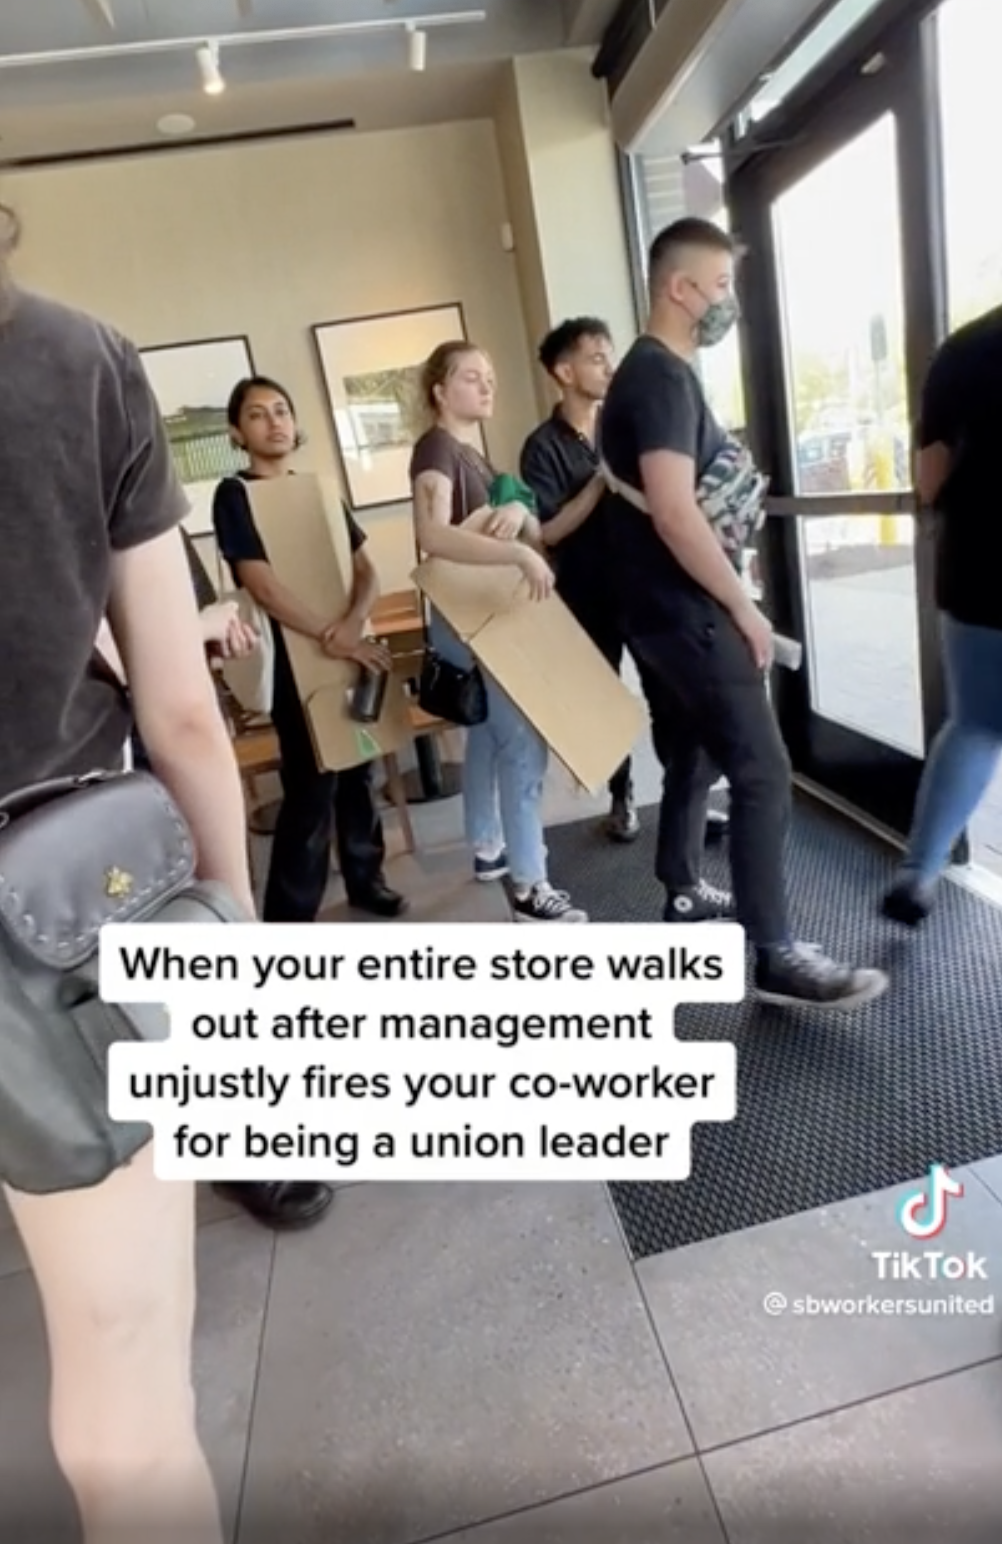 room - When your entire store walks out after management unjustly fires your coworker for being a union leader Tik Tok stworkersunited